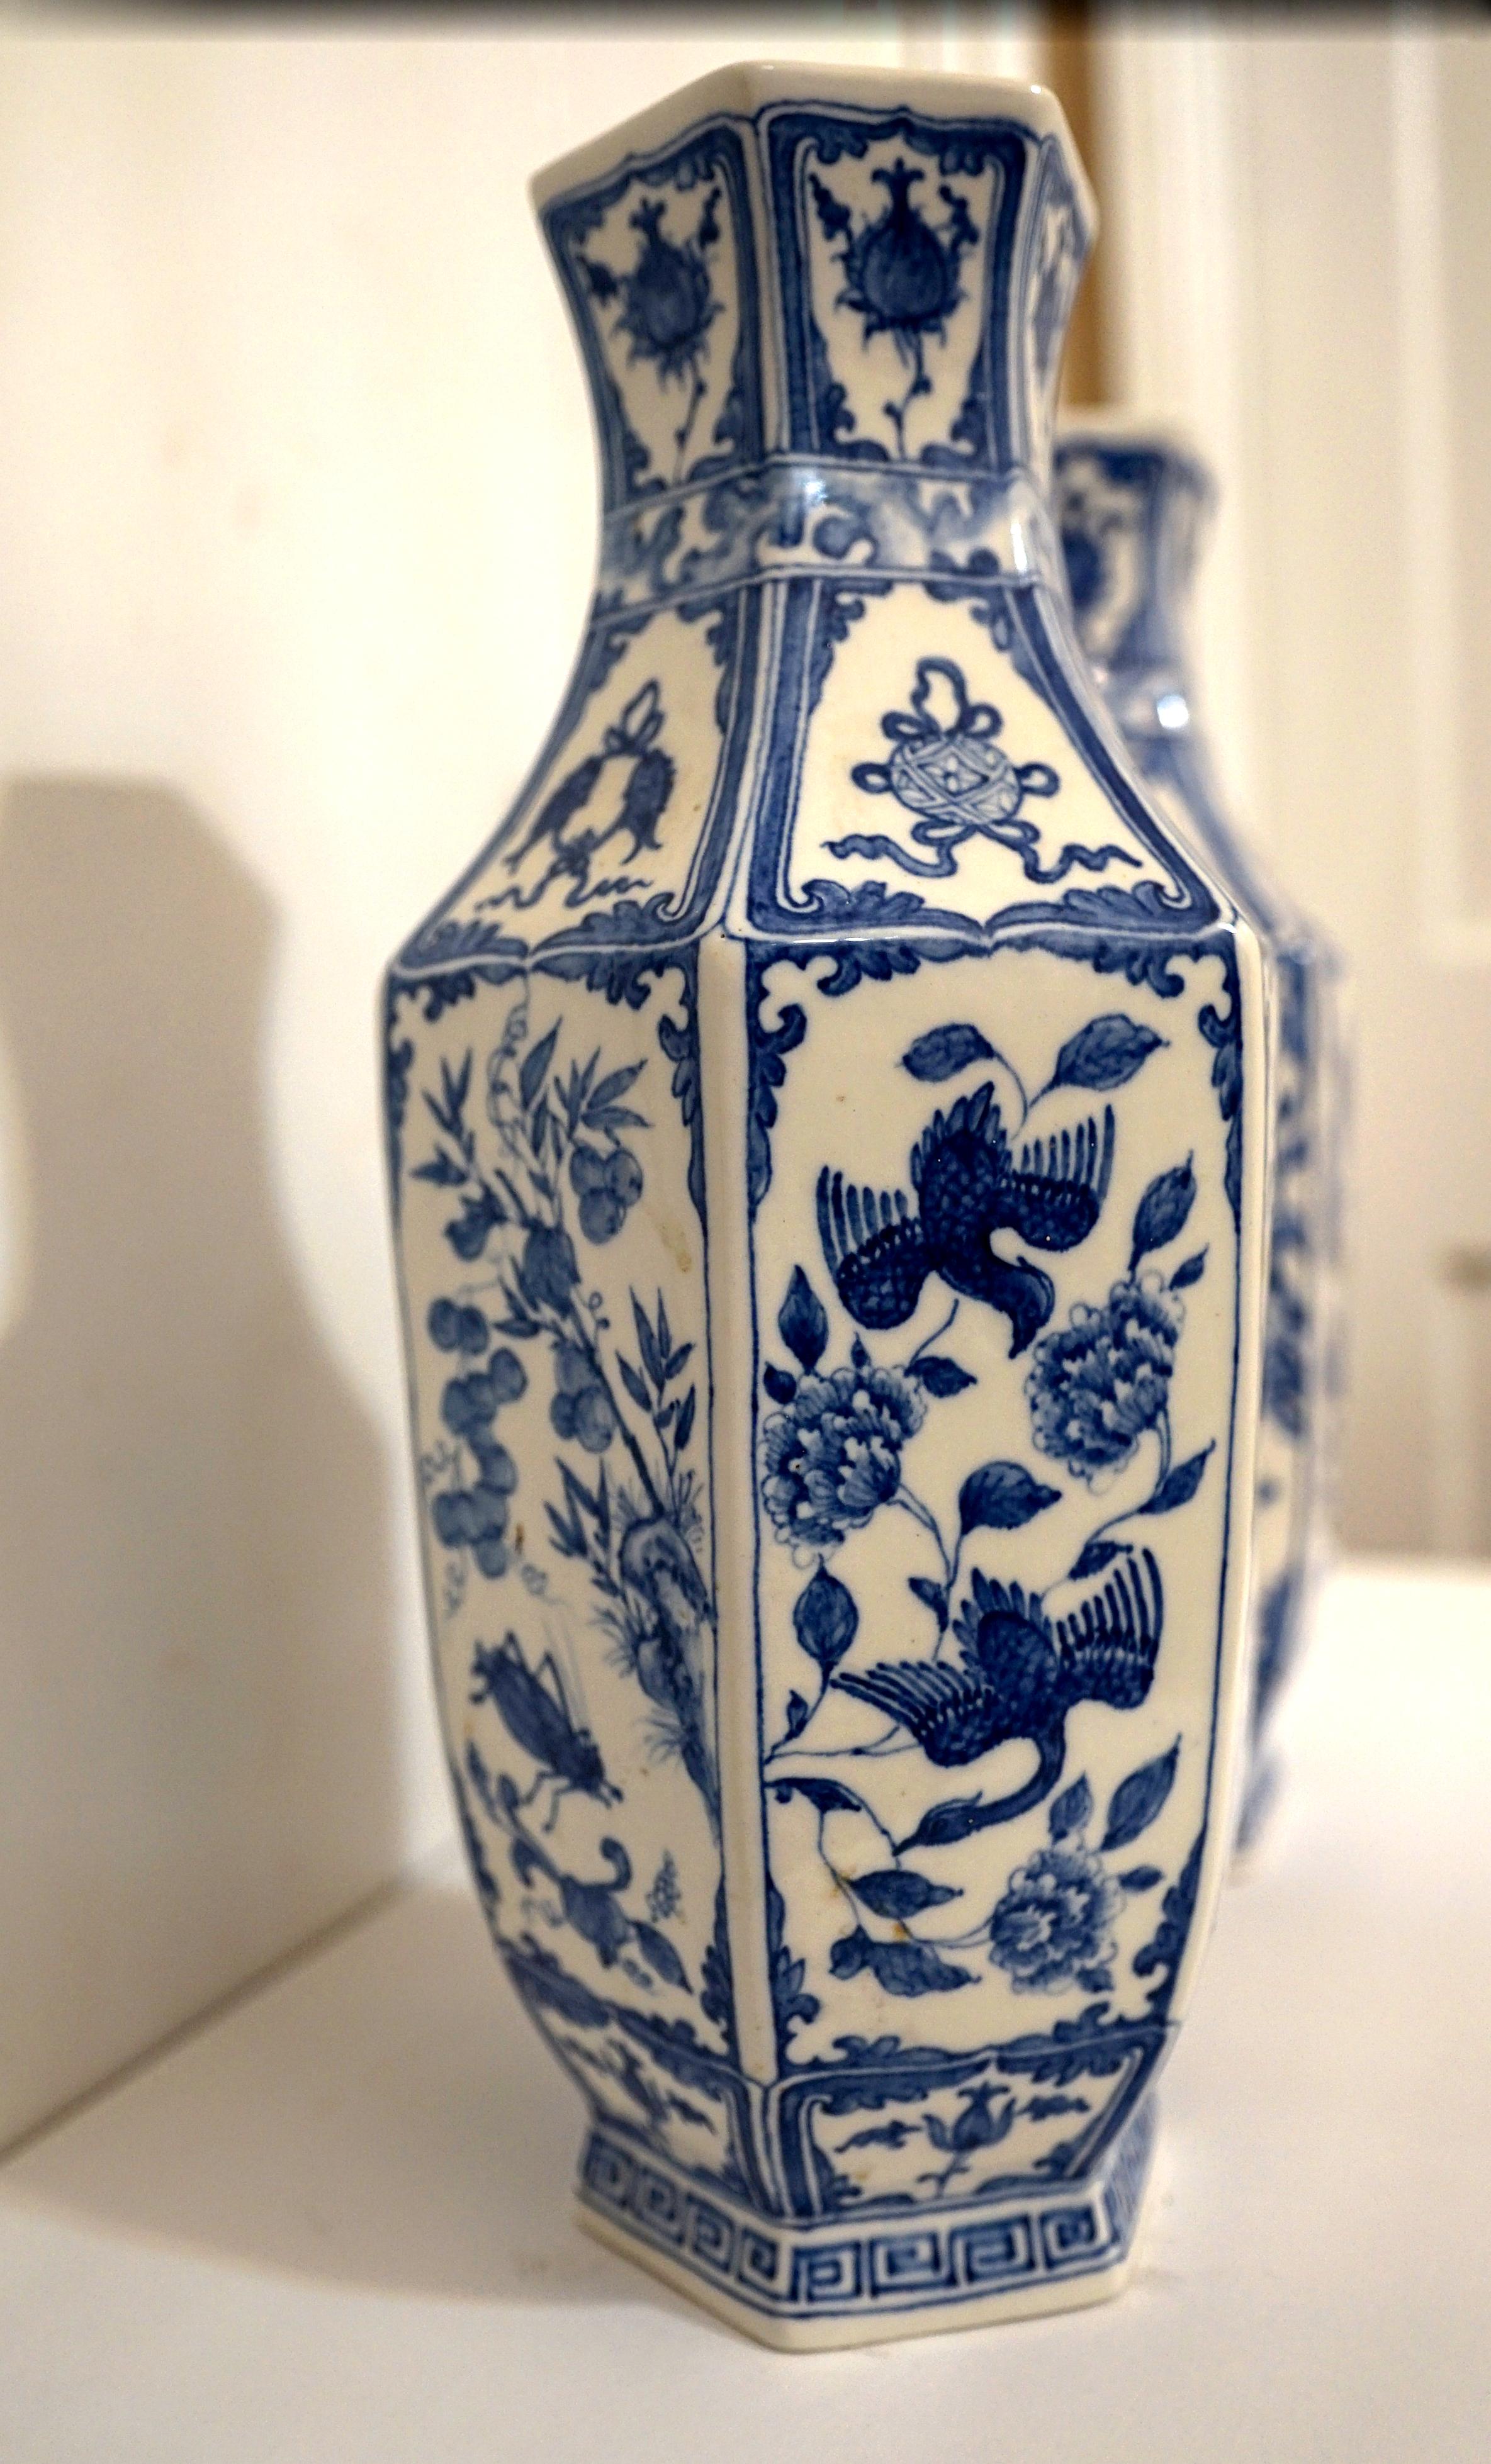 This pair of Continental Chinese influenced late 18th / early 19th century vases are a great auction find. I could not believe my eyes at the pair!
They are blue and white hexagonal porcelain urns In the style of Delft. The white hexagonal body is